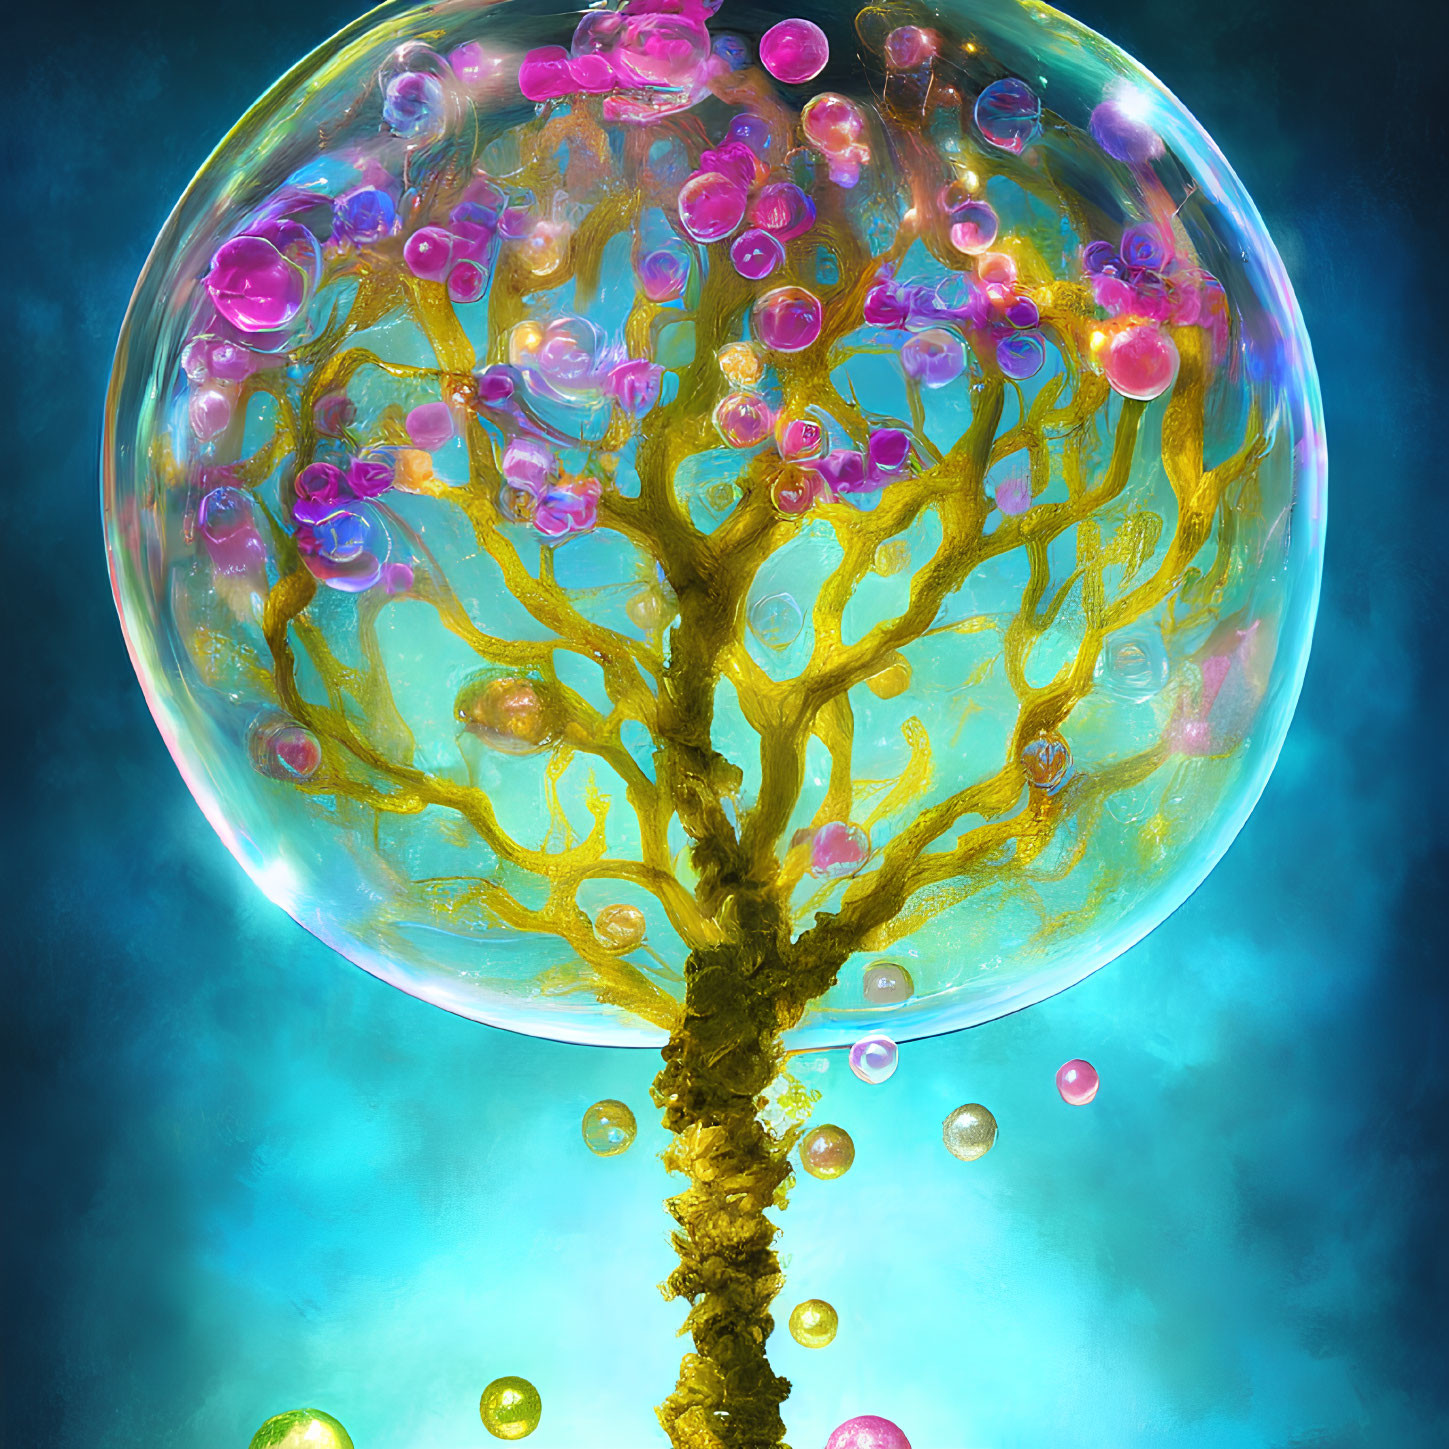 Golden Branches Tree in Translucent Bubble Surrounded by Smaller Bubbles on Blue Background